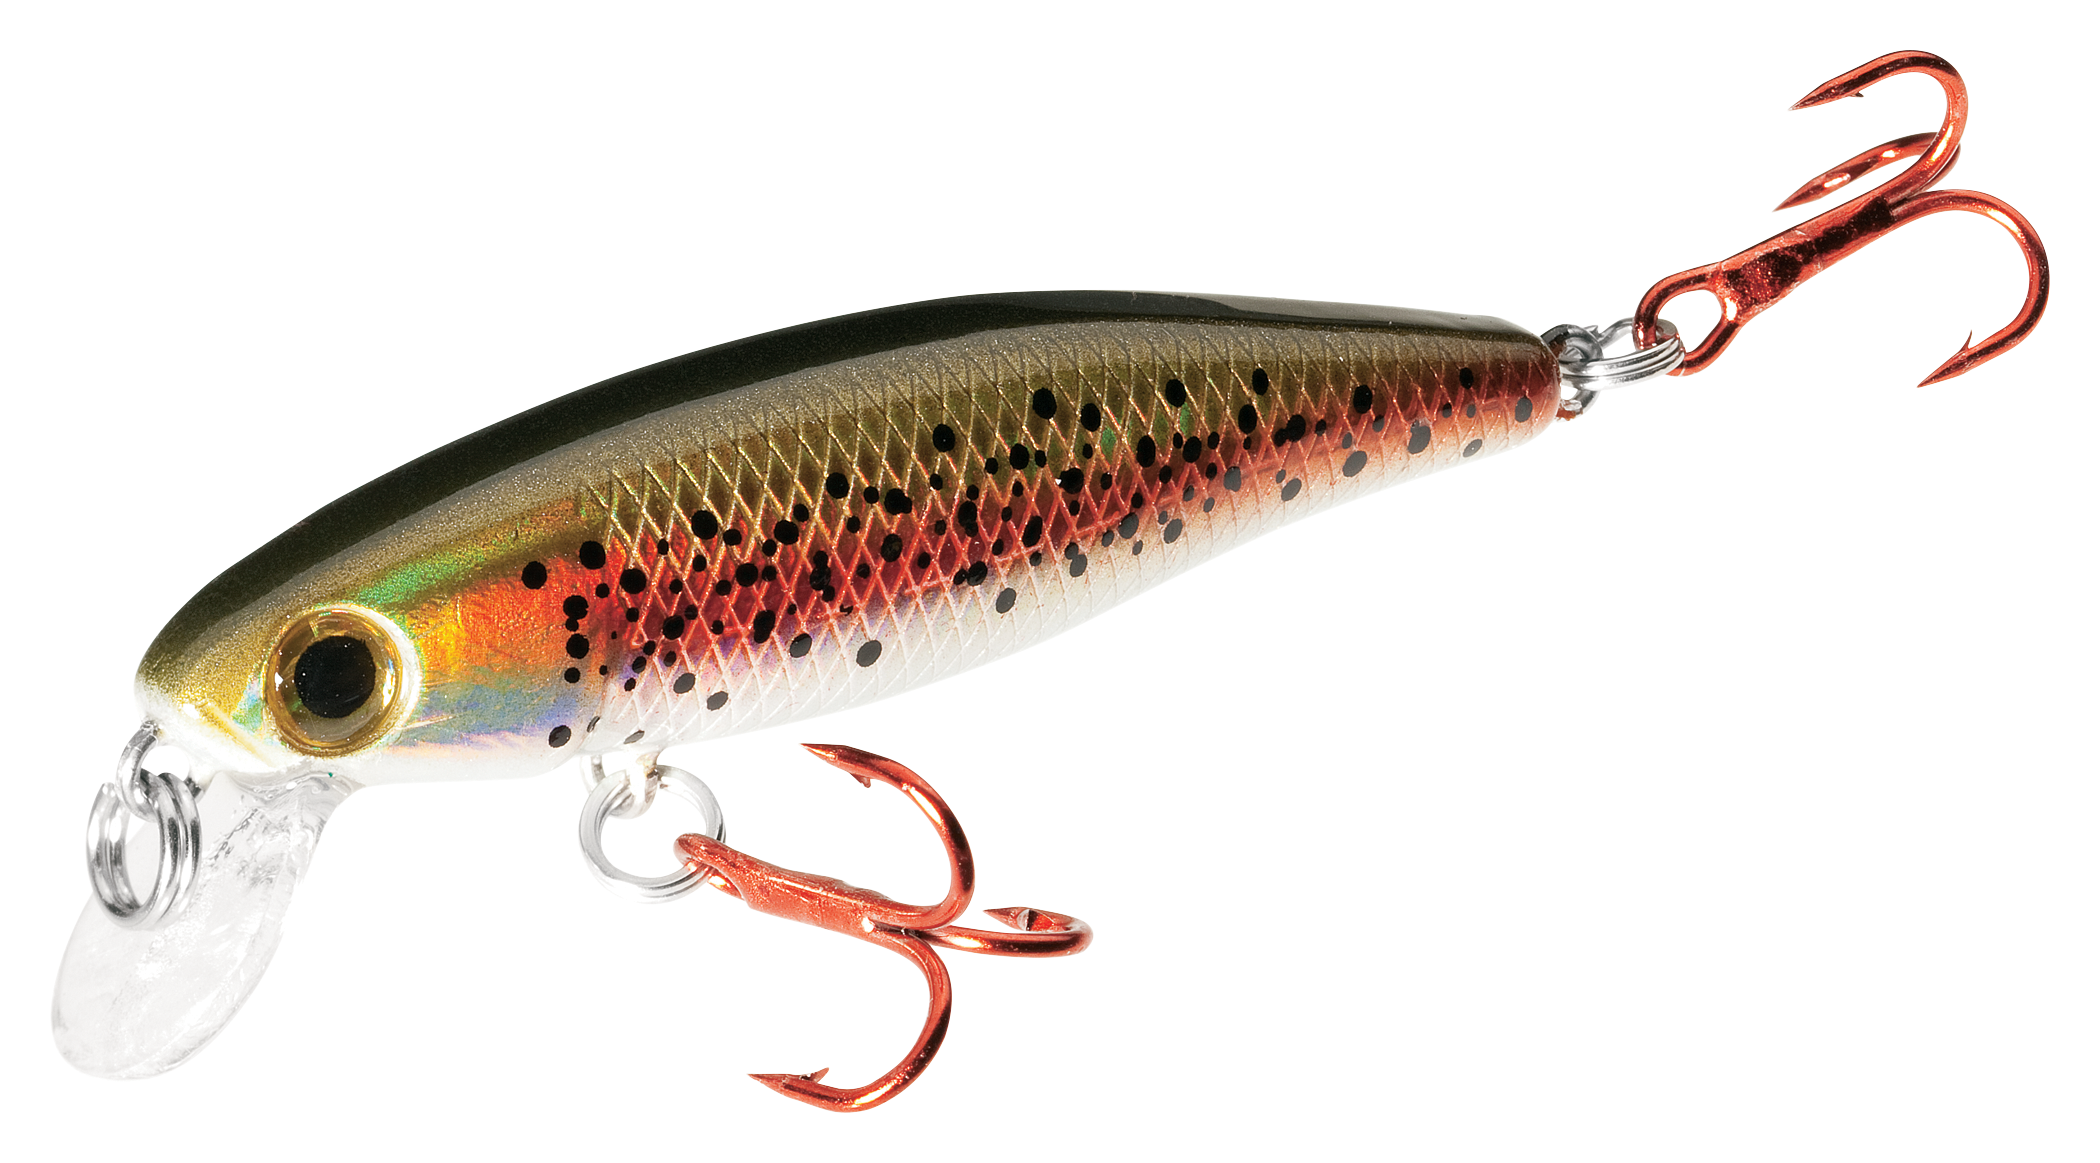 Dynamic Lures HD Trout (Glimmer Trout) – Trophy Trout Lures and Fly Fishing